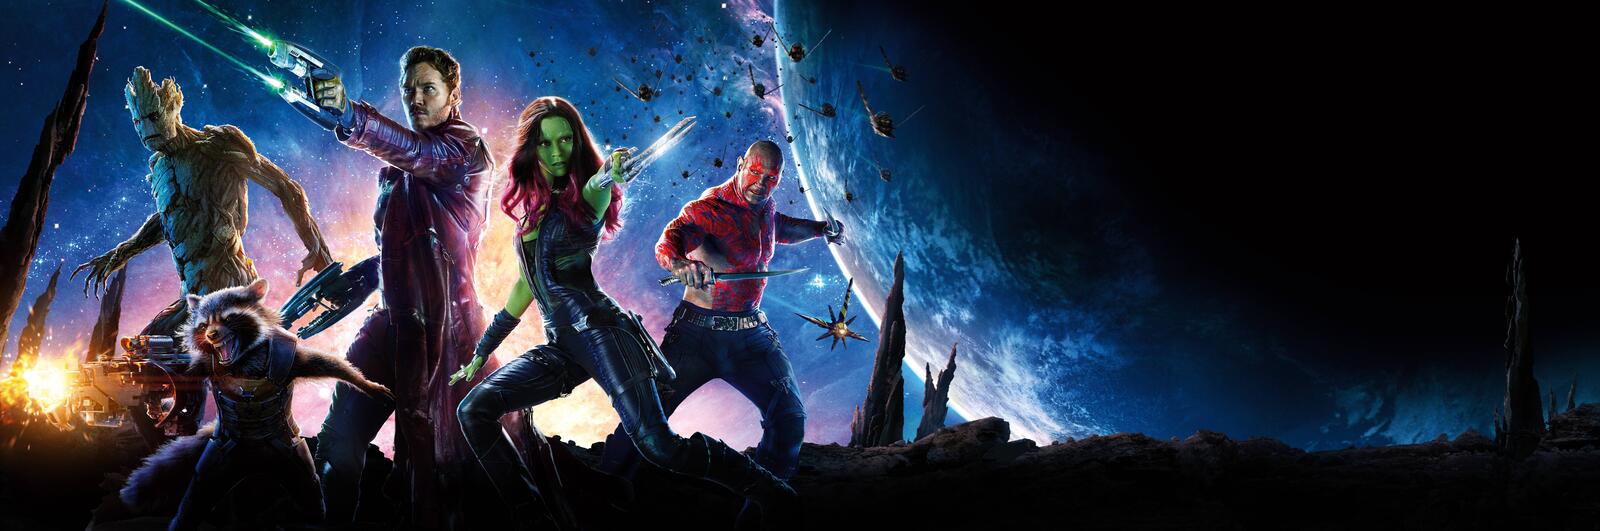 Wallpapers Guardians of the Galaxy science fiction action on the desktop